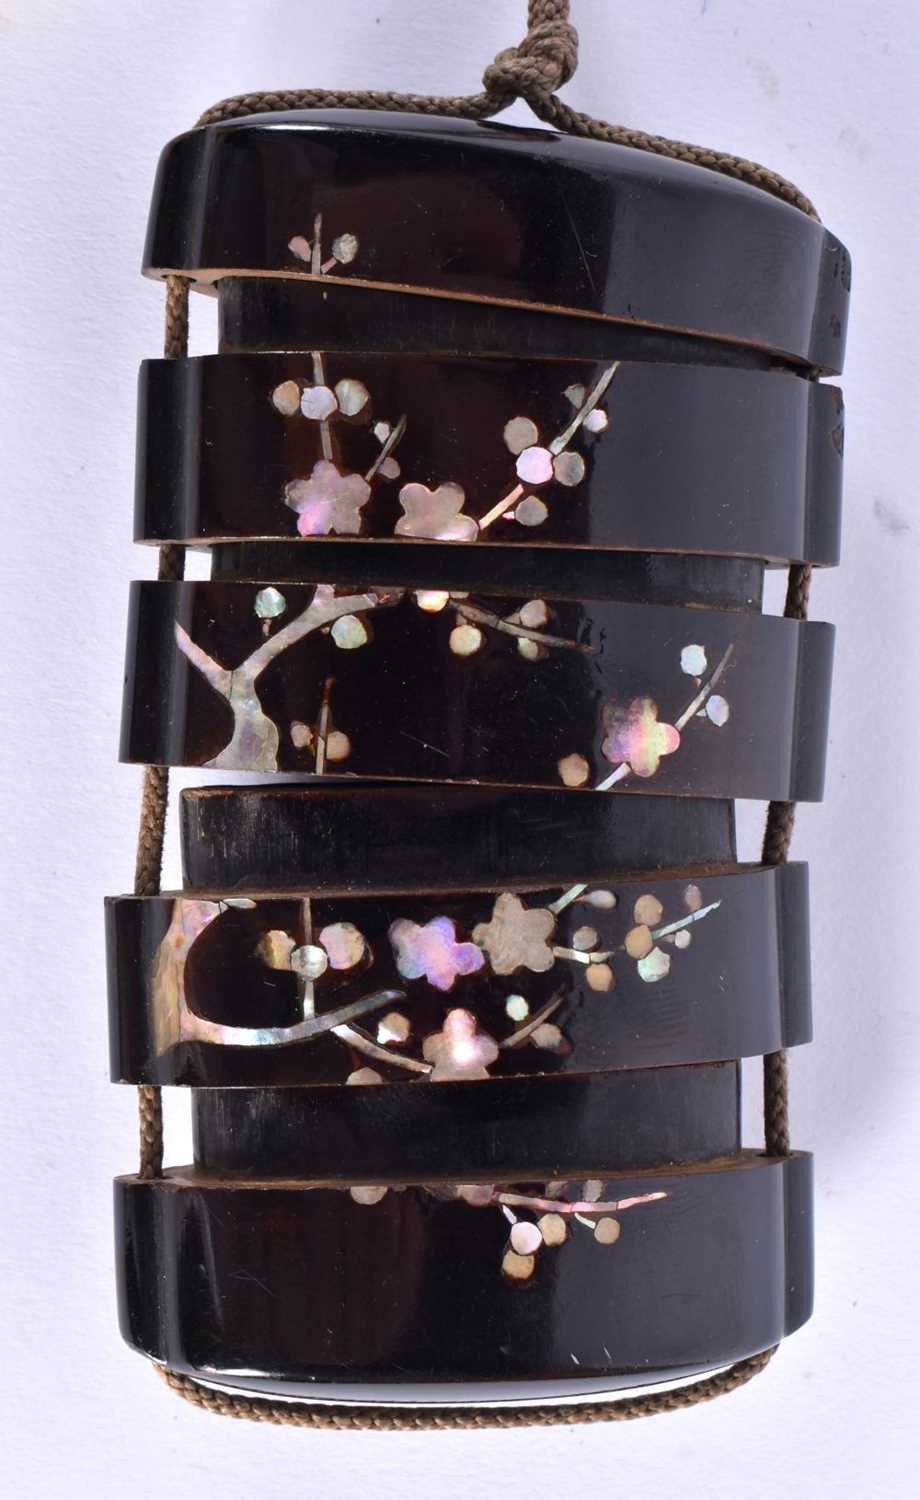 A LATE 19TH CENTURY JAPANESE MEIJI PERIOD MOTHER OF PEARL INLAID BLACK LACQUER INRO decorated with - Image 2 of 4